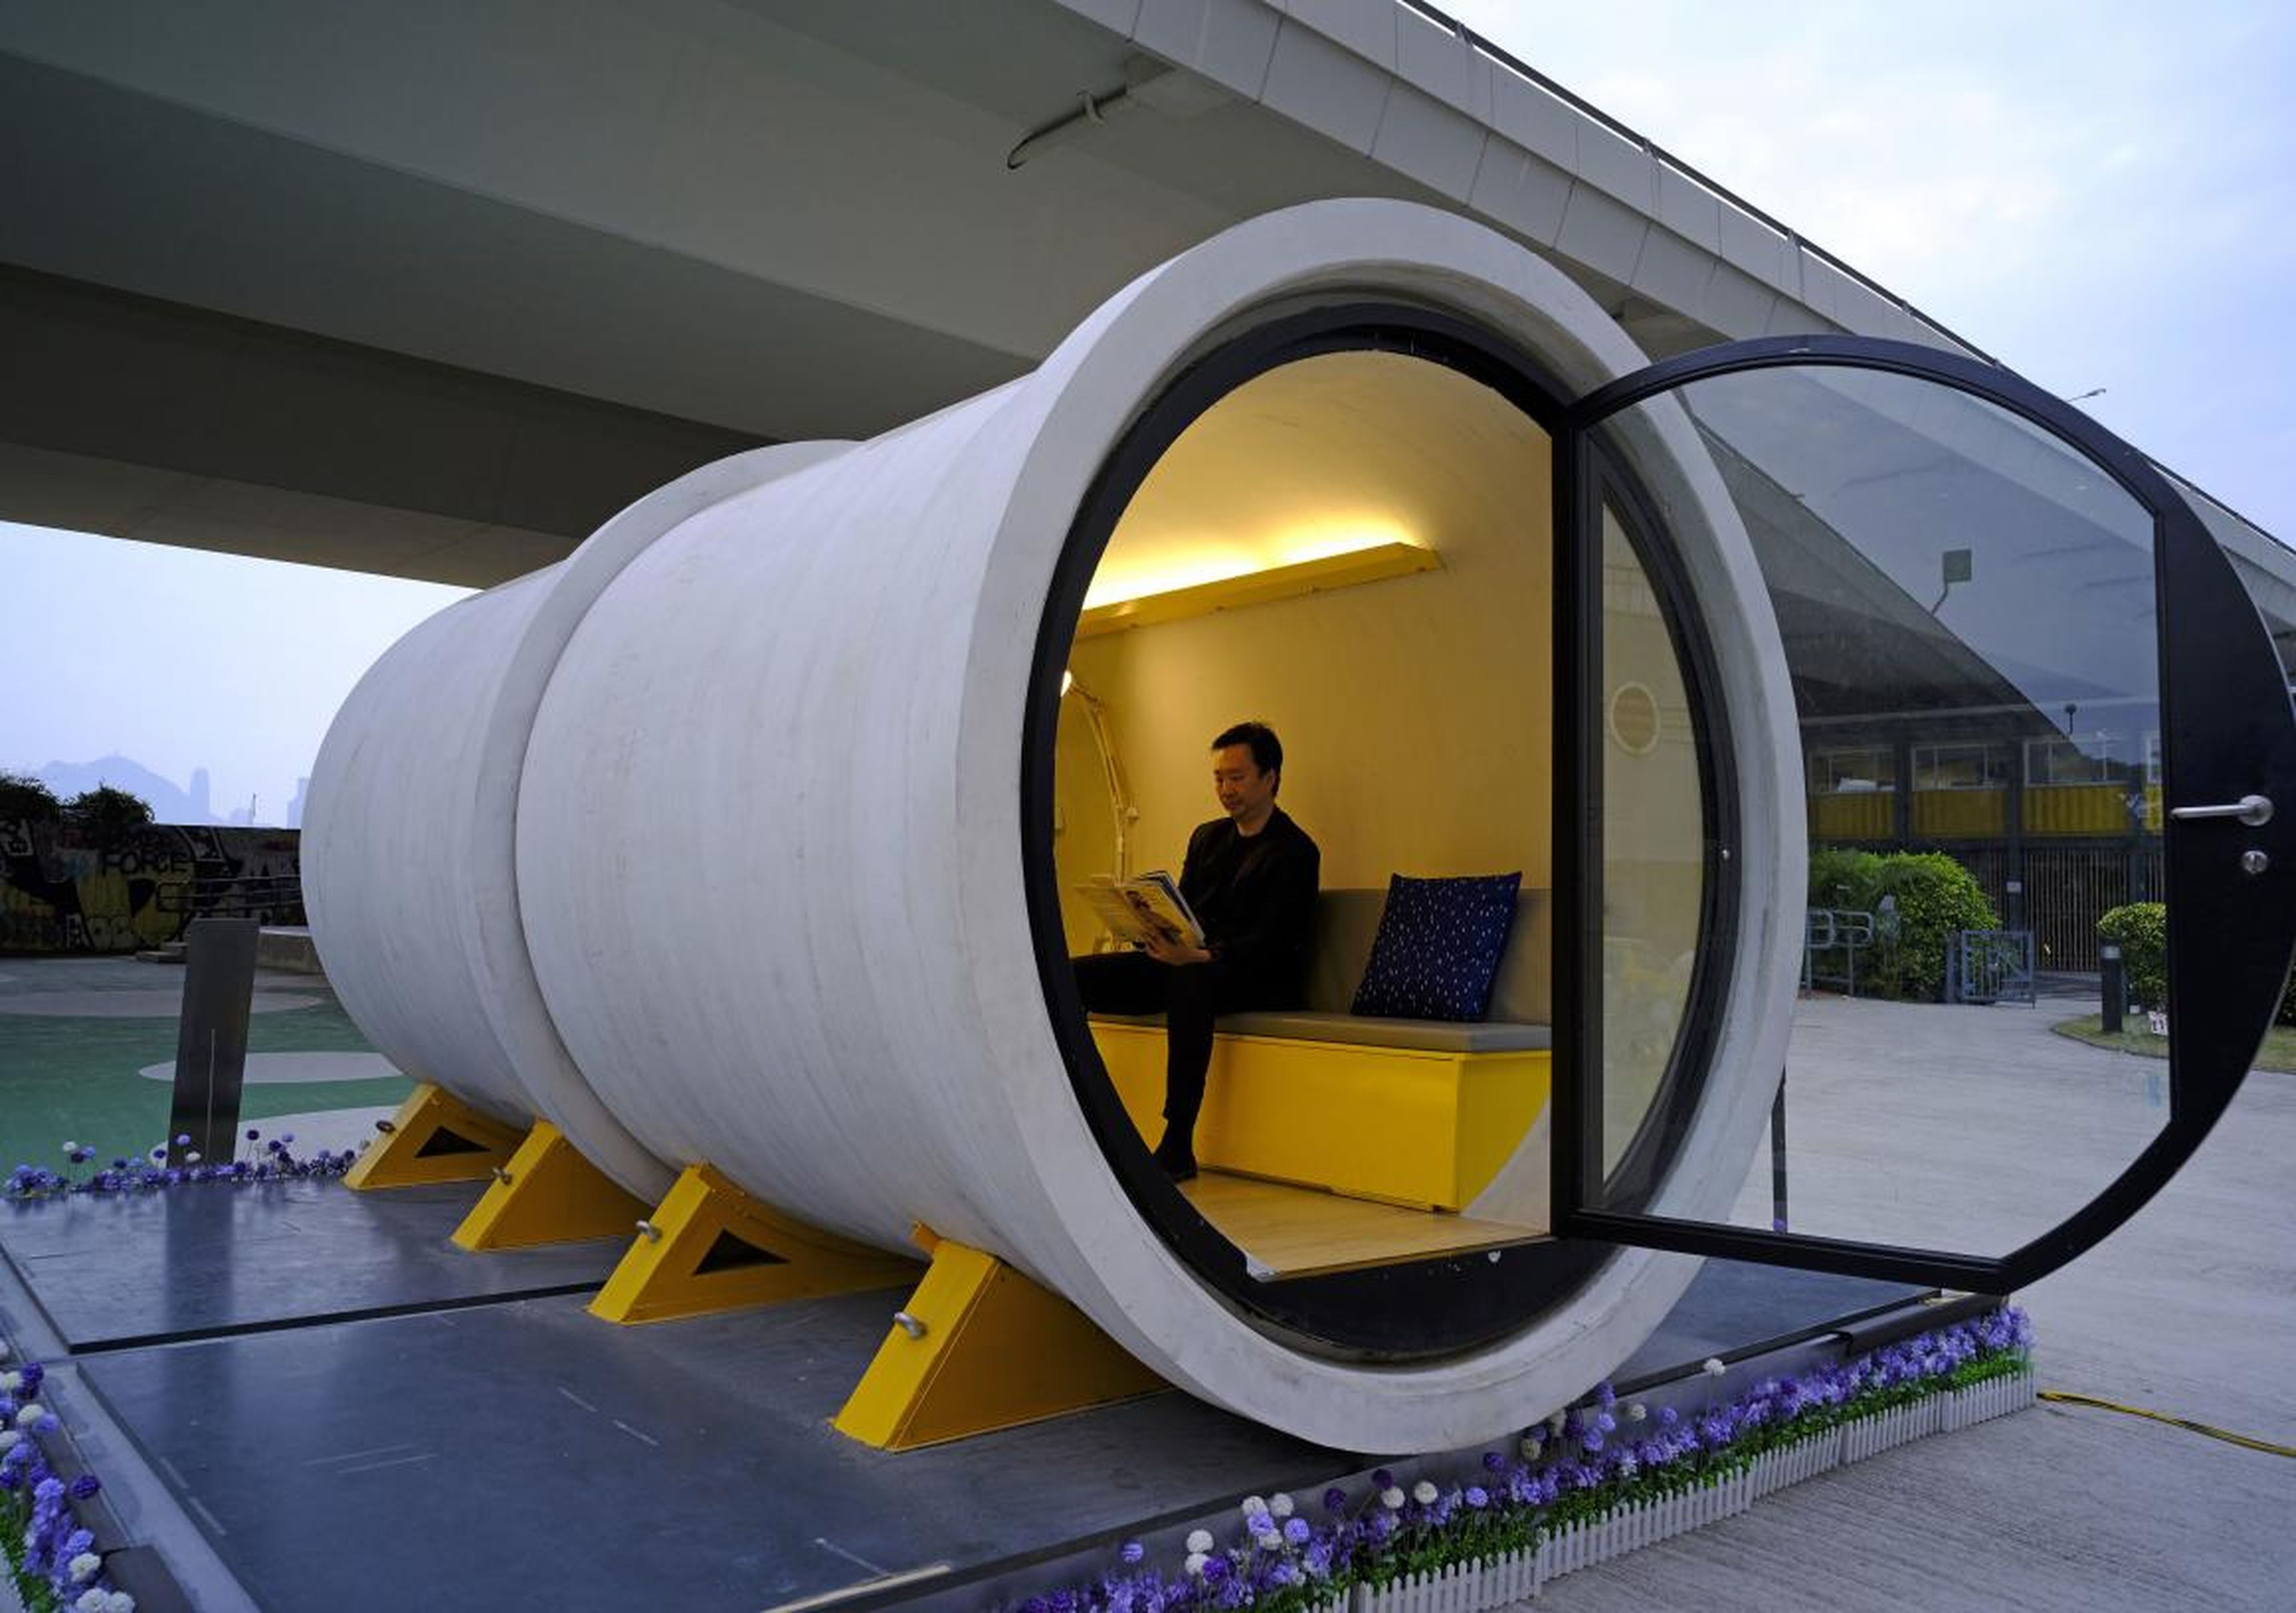 James Law, a Hong Kong architect, had the idea to build microapartments inside giant concrete drainage pipes.